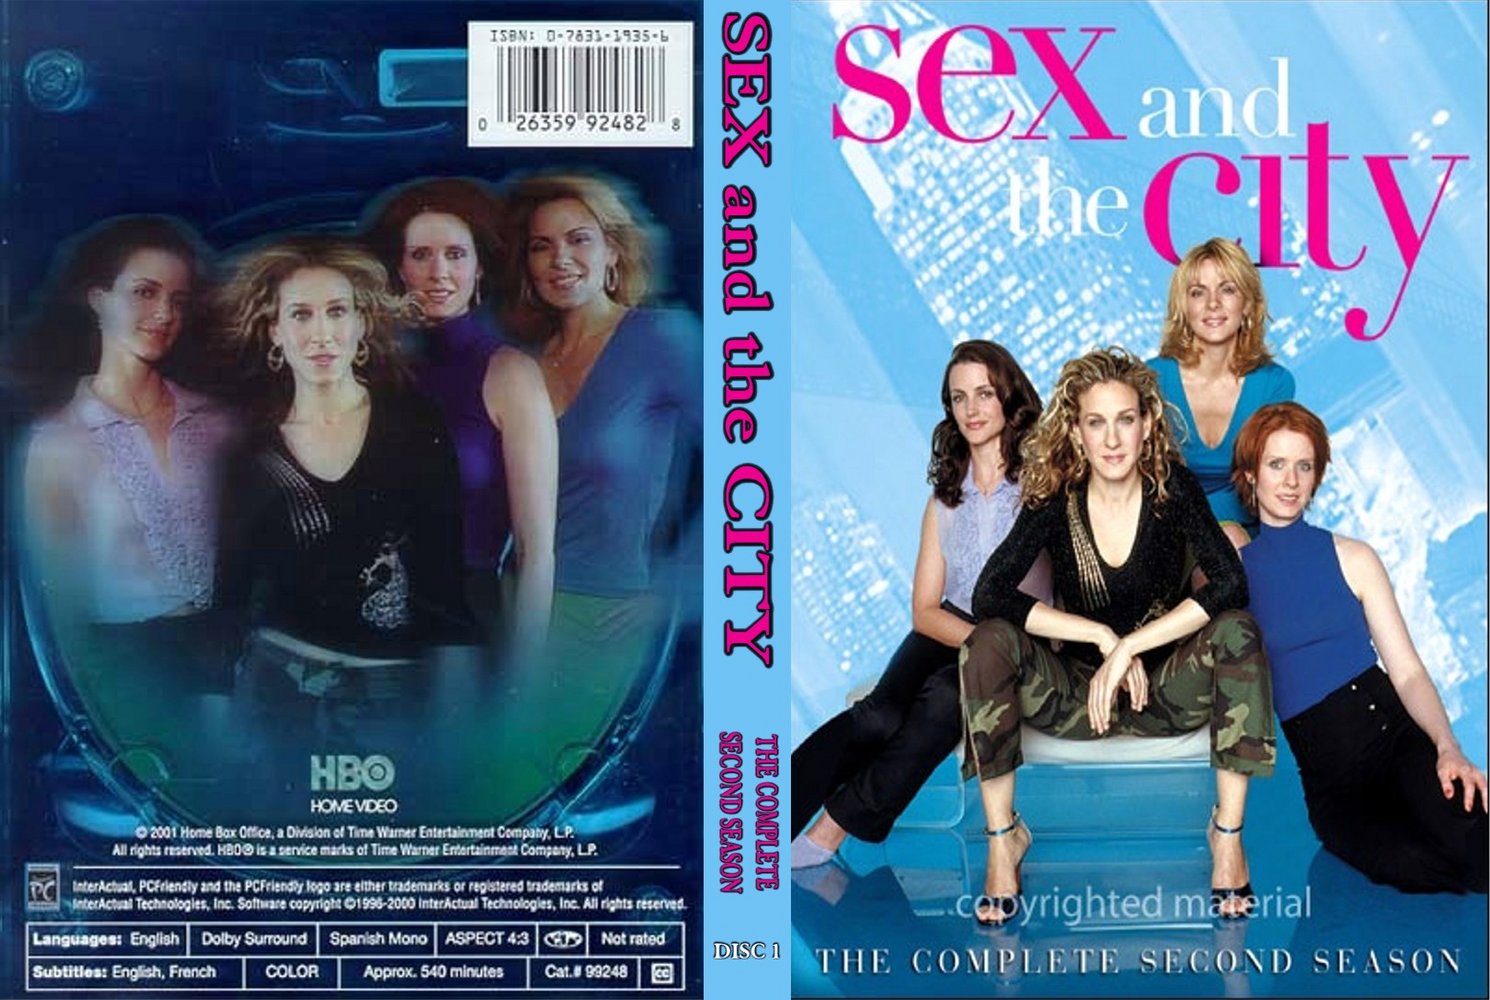 Jaquette DVD Sex and the city Saison 2 Zone 1